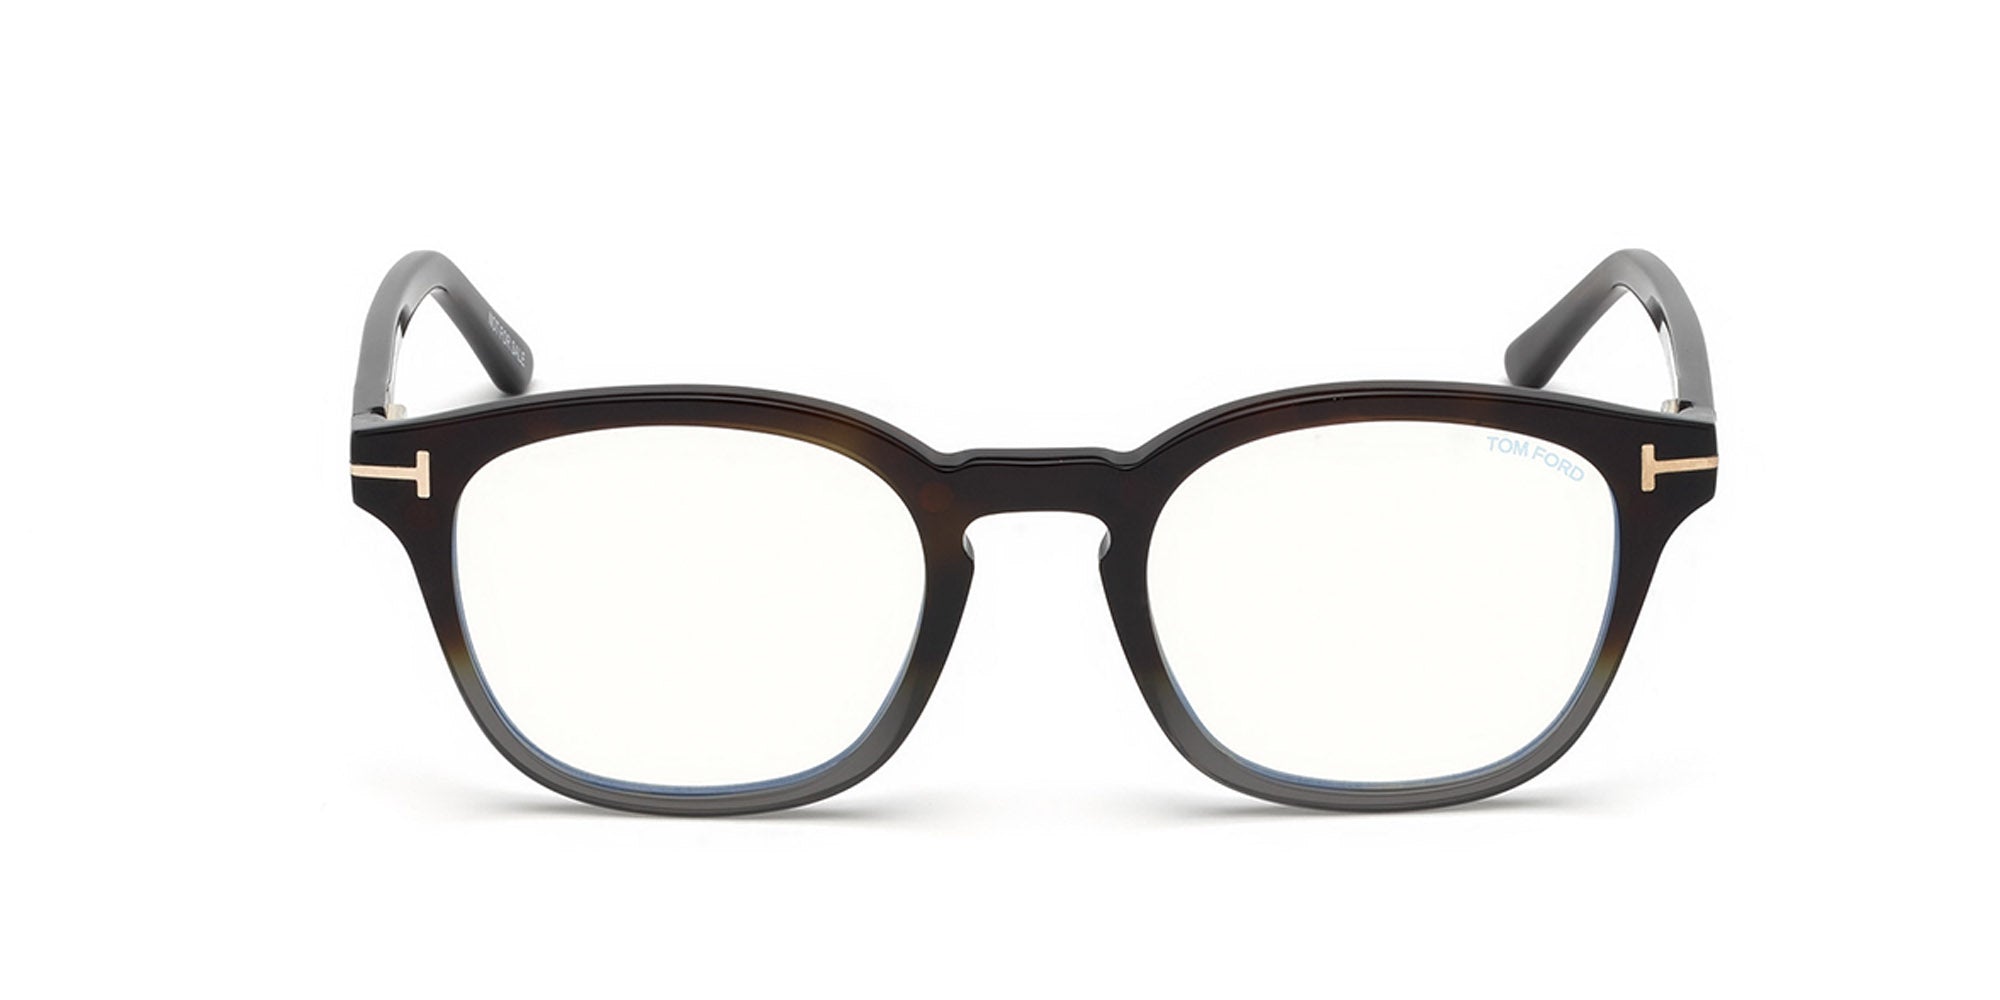 Tom Ford TF B With Clip on Rectangle Glasses   Fashion Eyewear